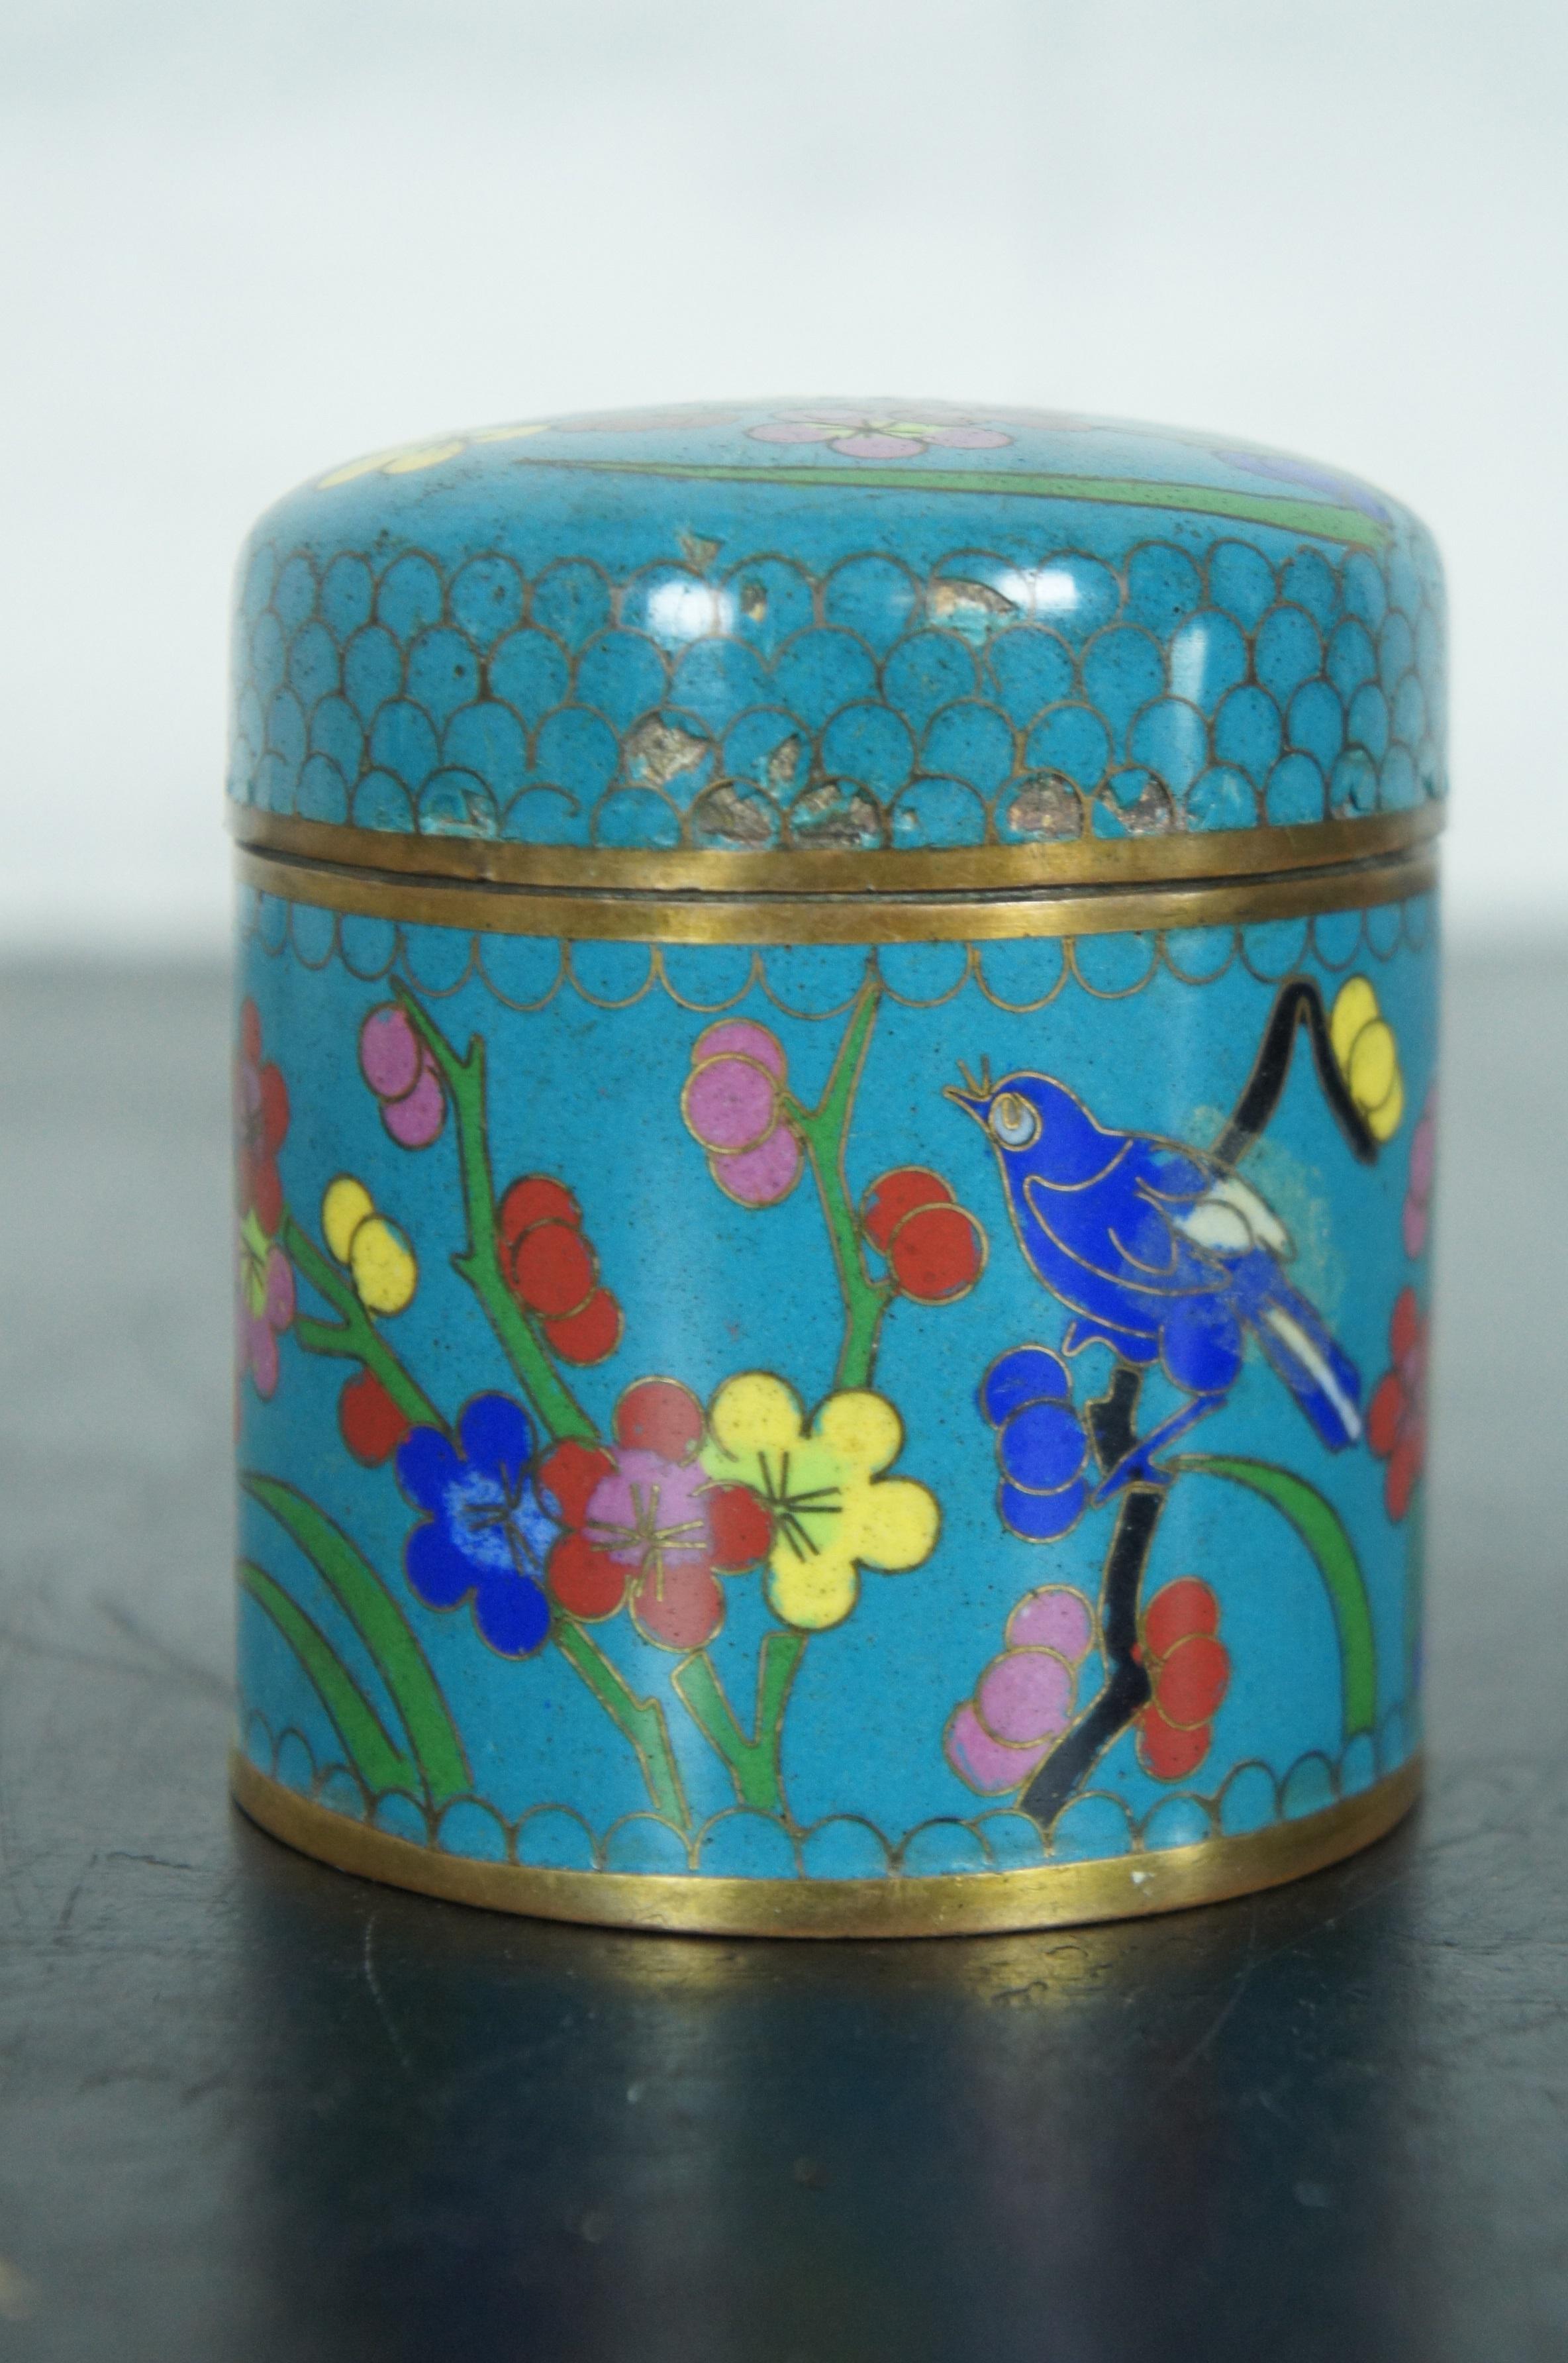 20th Century Chinese Cloisonne Enamel Blue Floral Tea Caddy Canister Trinket Jar Stamp Box